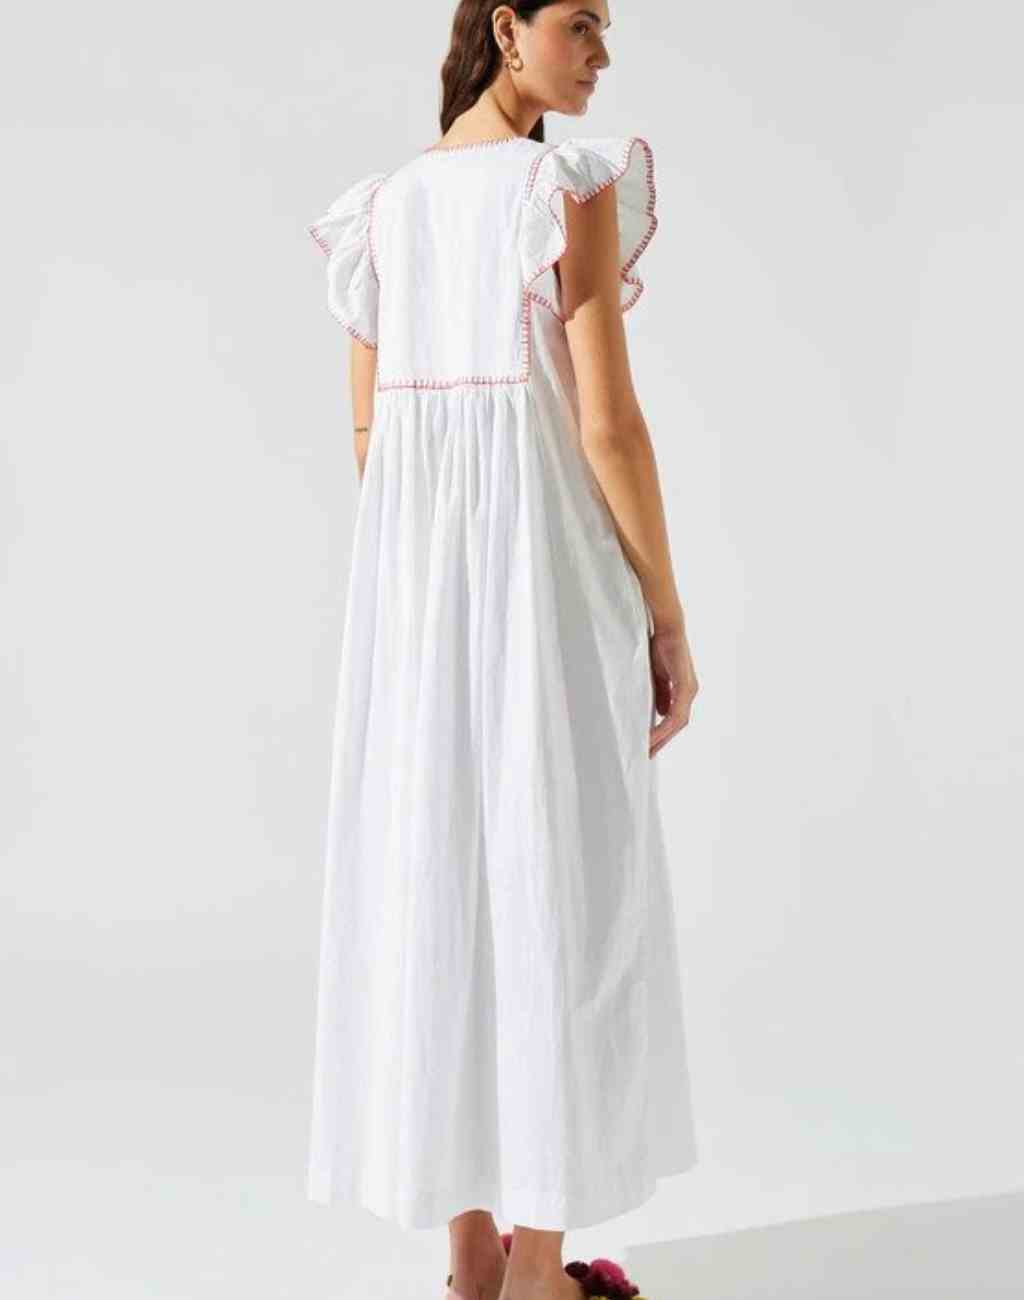 White Midi/Maxi Dress with Whimsical Embroidery and Flutter Sleeves